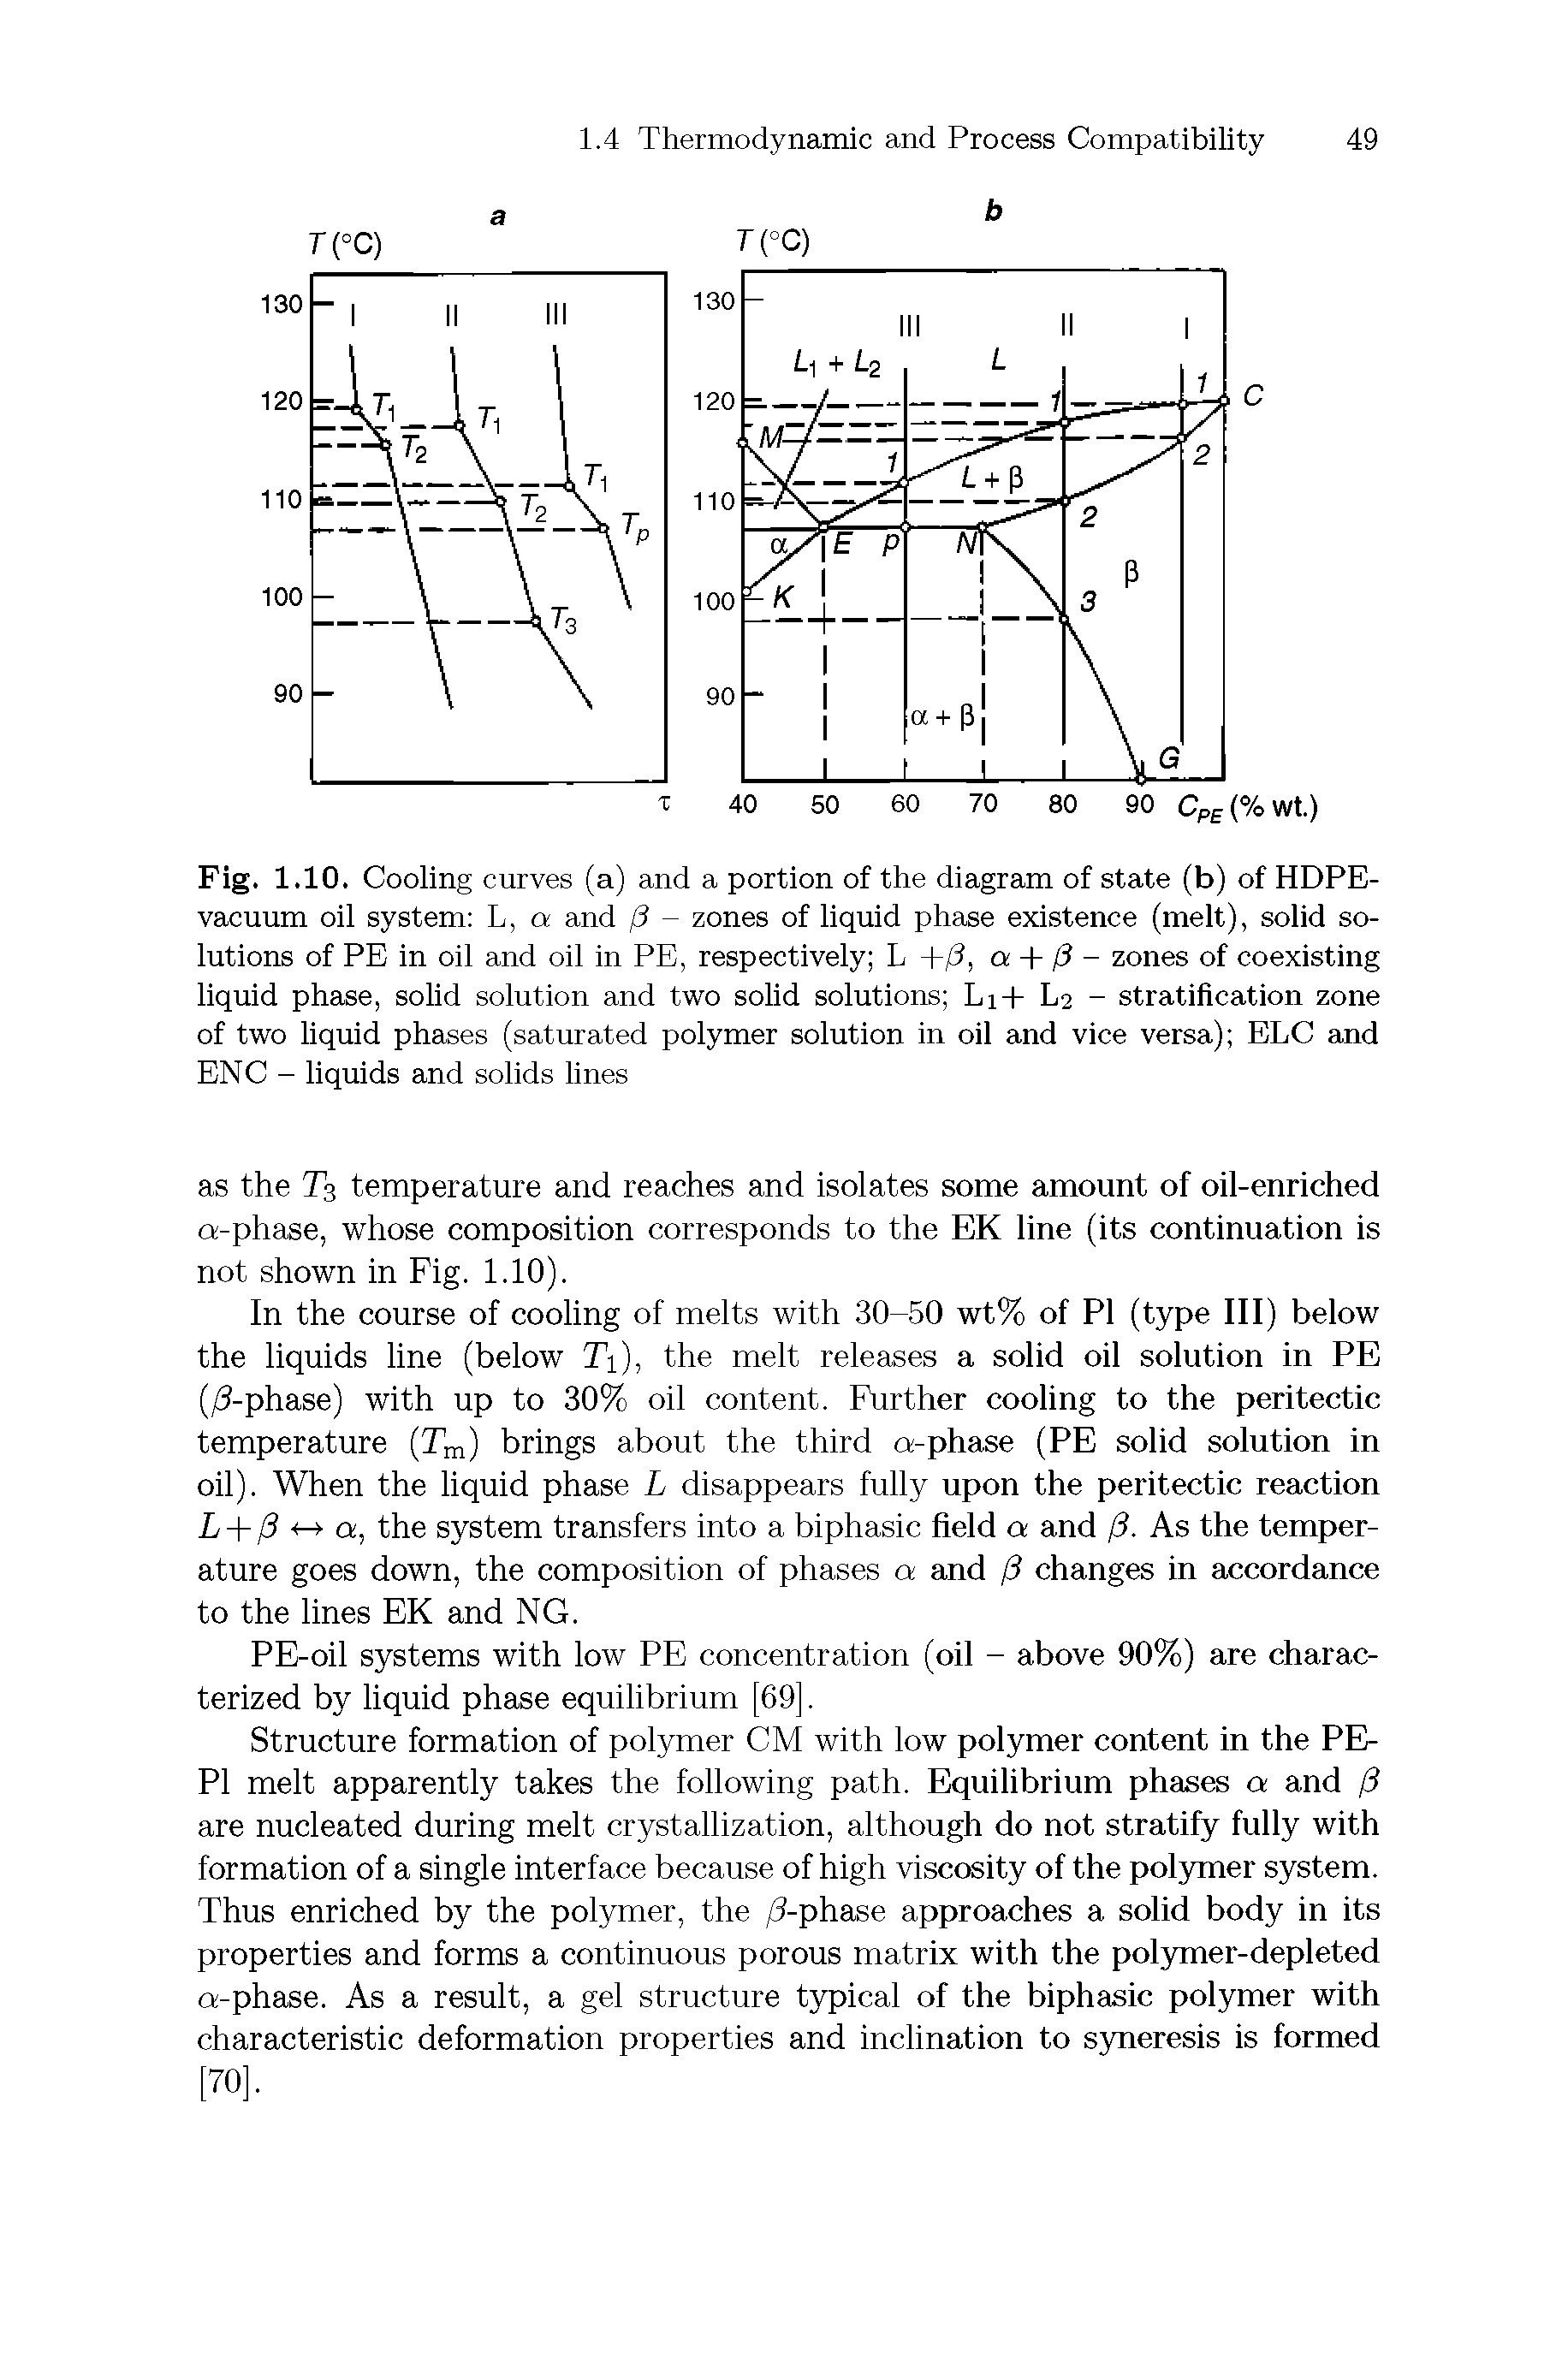 Fig. 1.10. Cooling curves (a) and a portion of the diagram of state (b) of HDPE-vacuum oil system L, a and j3 - zones of liquid phase existence (melt), solid solutions of PE in oil and oil in PE, respectively L +/3, a - - / - zones of coexisting liquid phase, solid solution and two solid solutions Li- - L2 - stratification zone of two liquid phases (saturated polymer solution in oil and vice versa) ELC and ENC - liquids and solids lines...